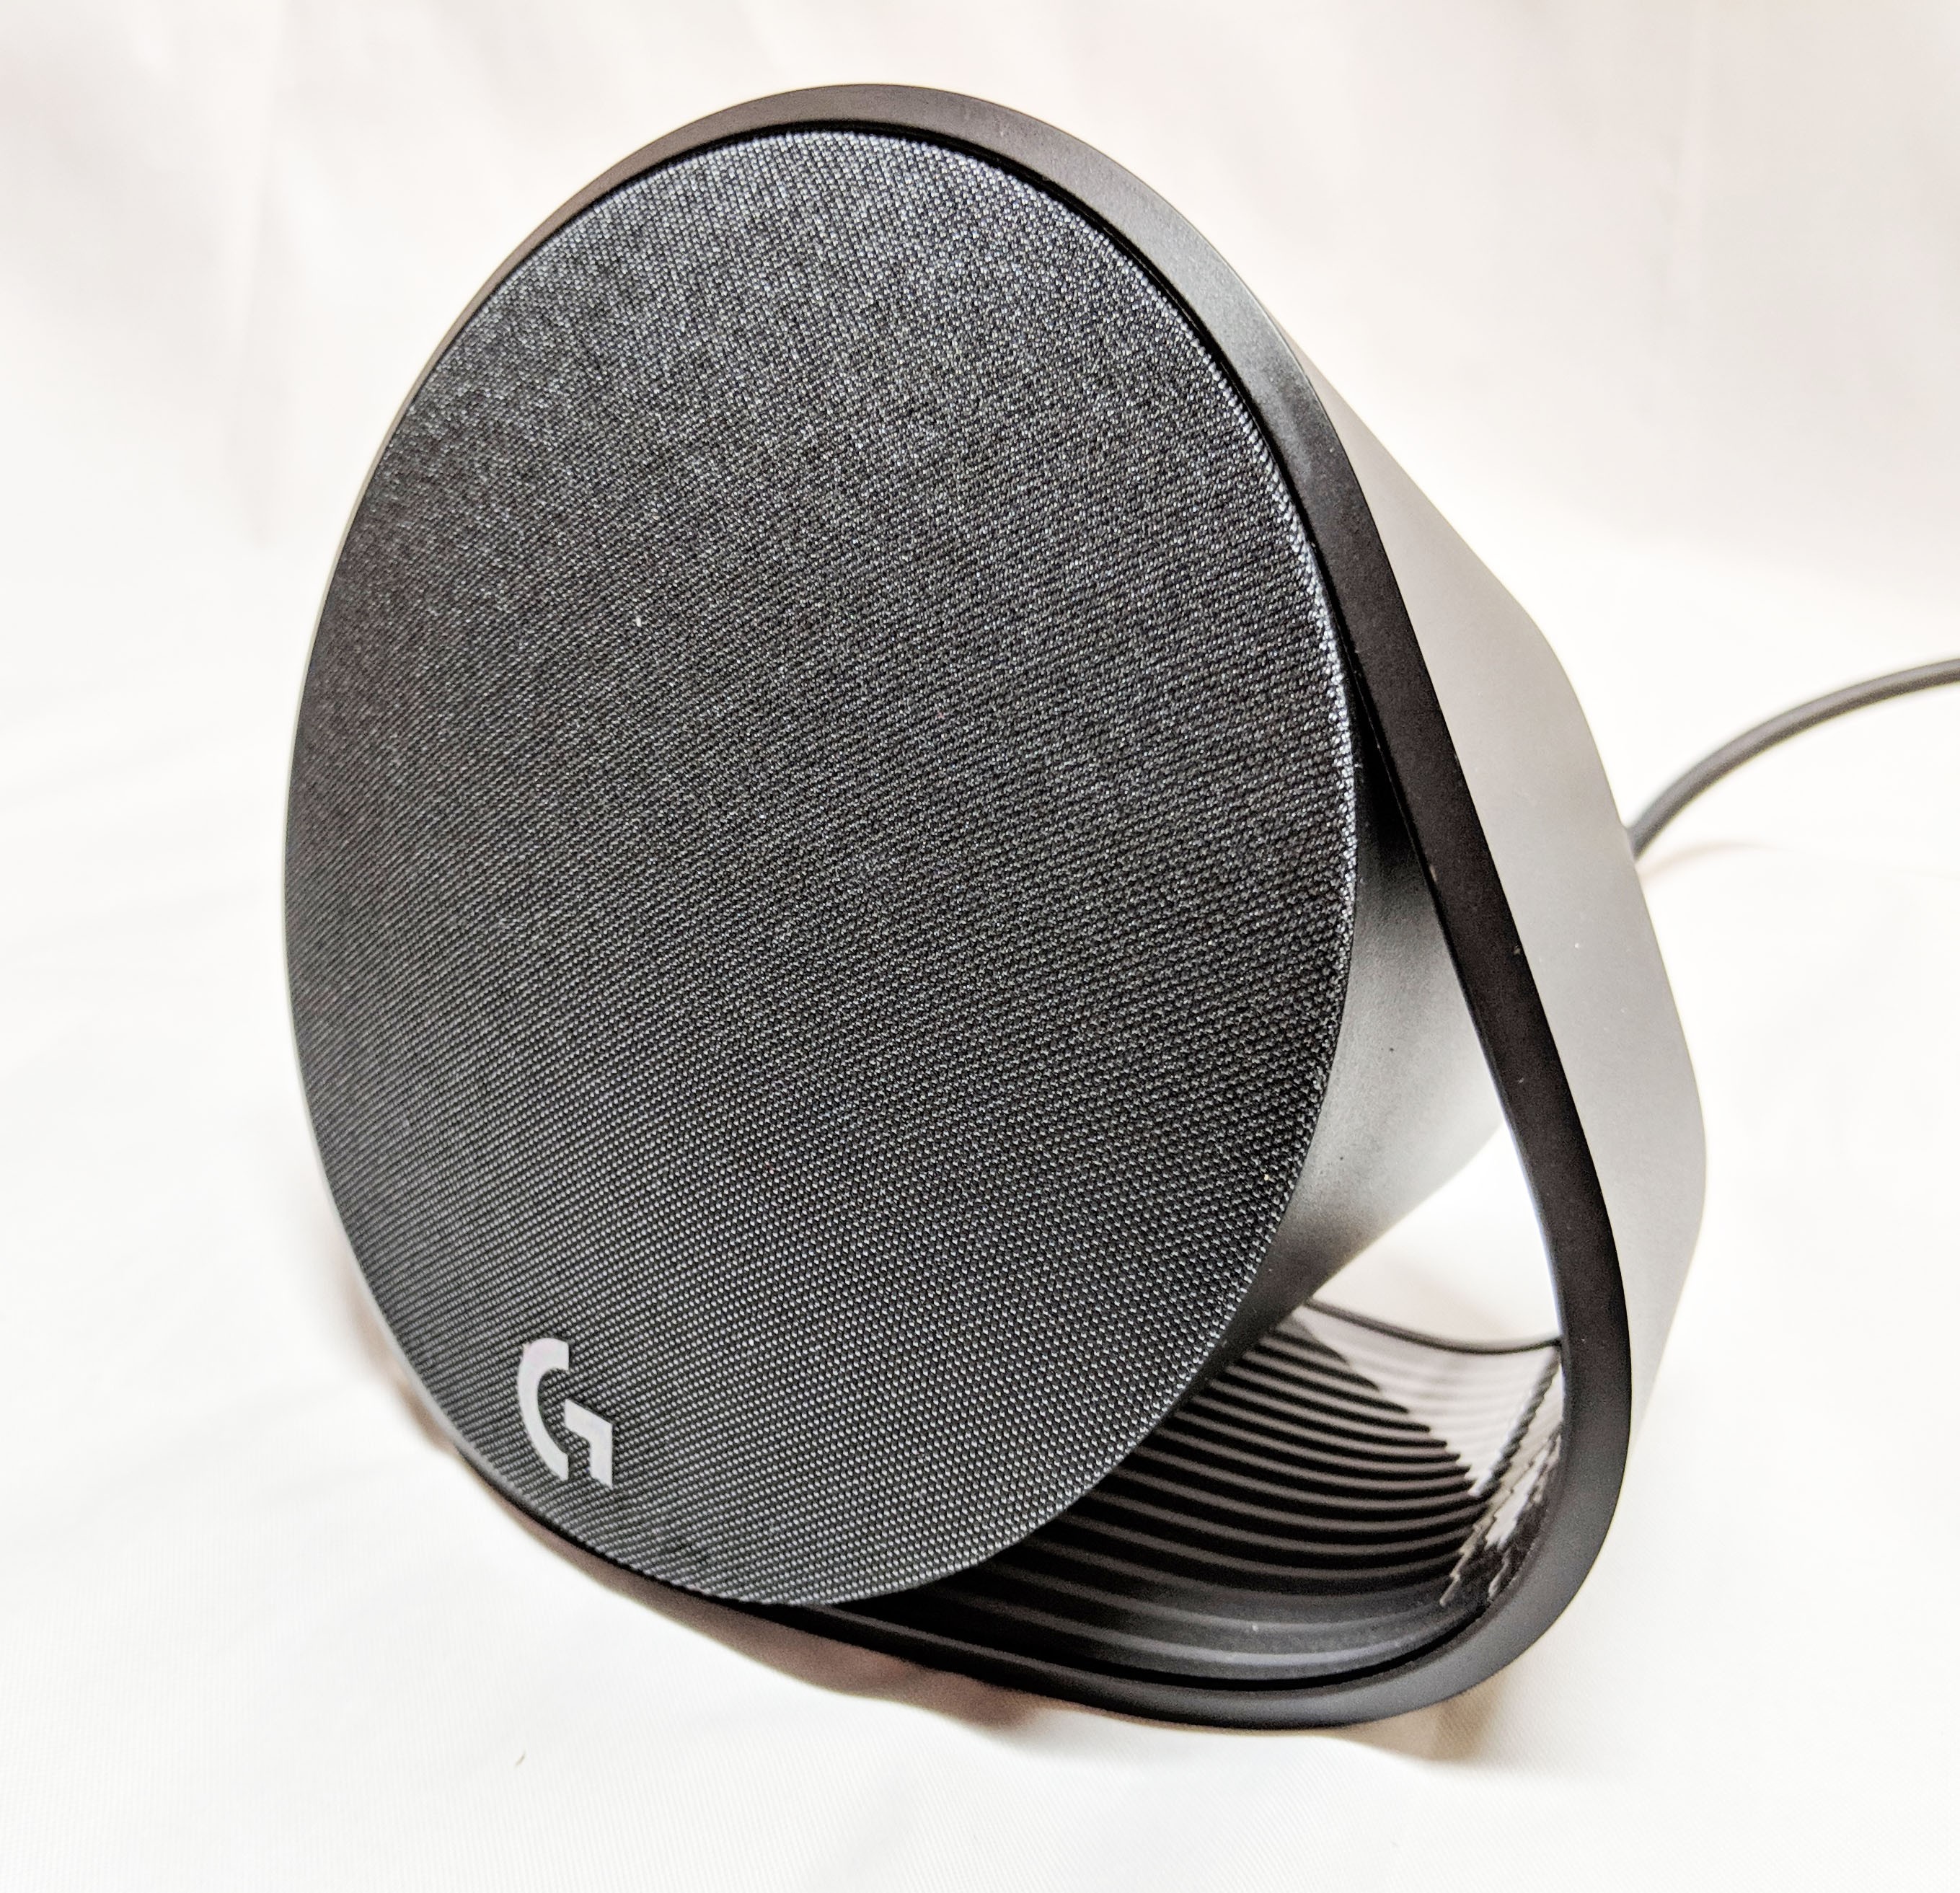 Logitech G560 Gaming Speakers - Full Review and Benchmarks